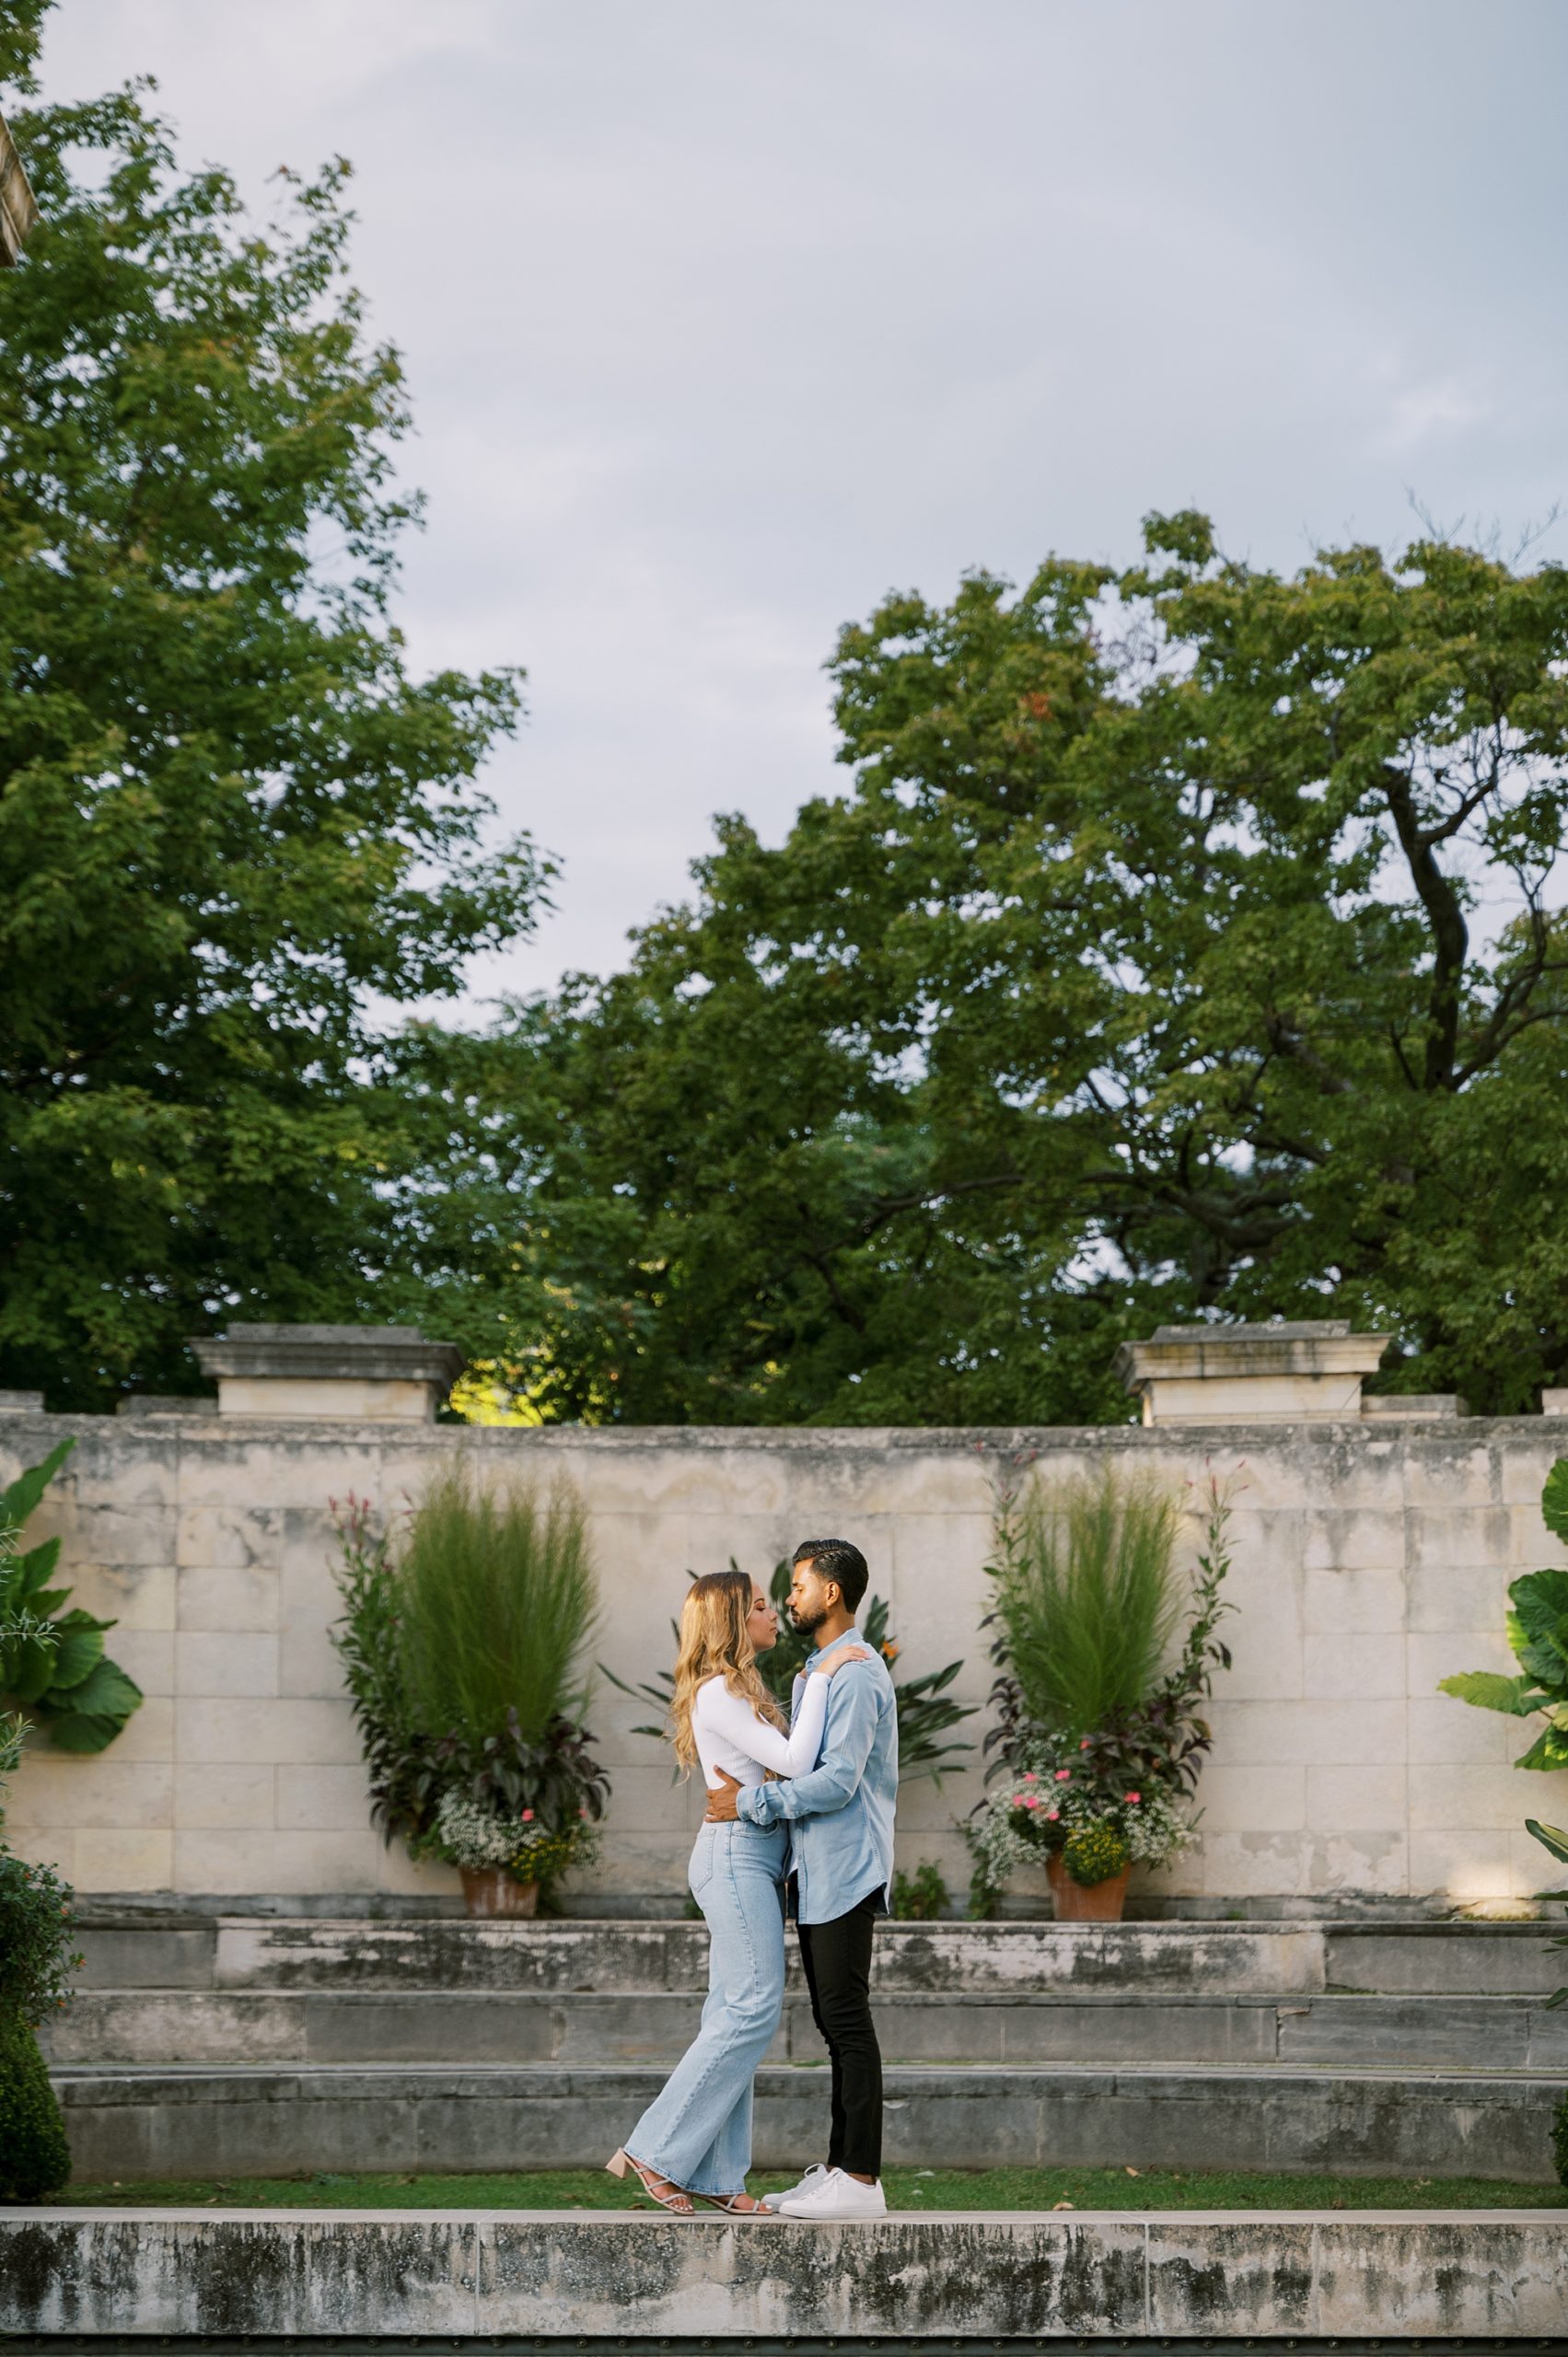 engaged couple in casual outfits kiss on stone steps inside Untemyer Gardens Conservancy